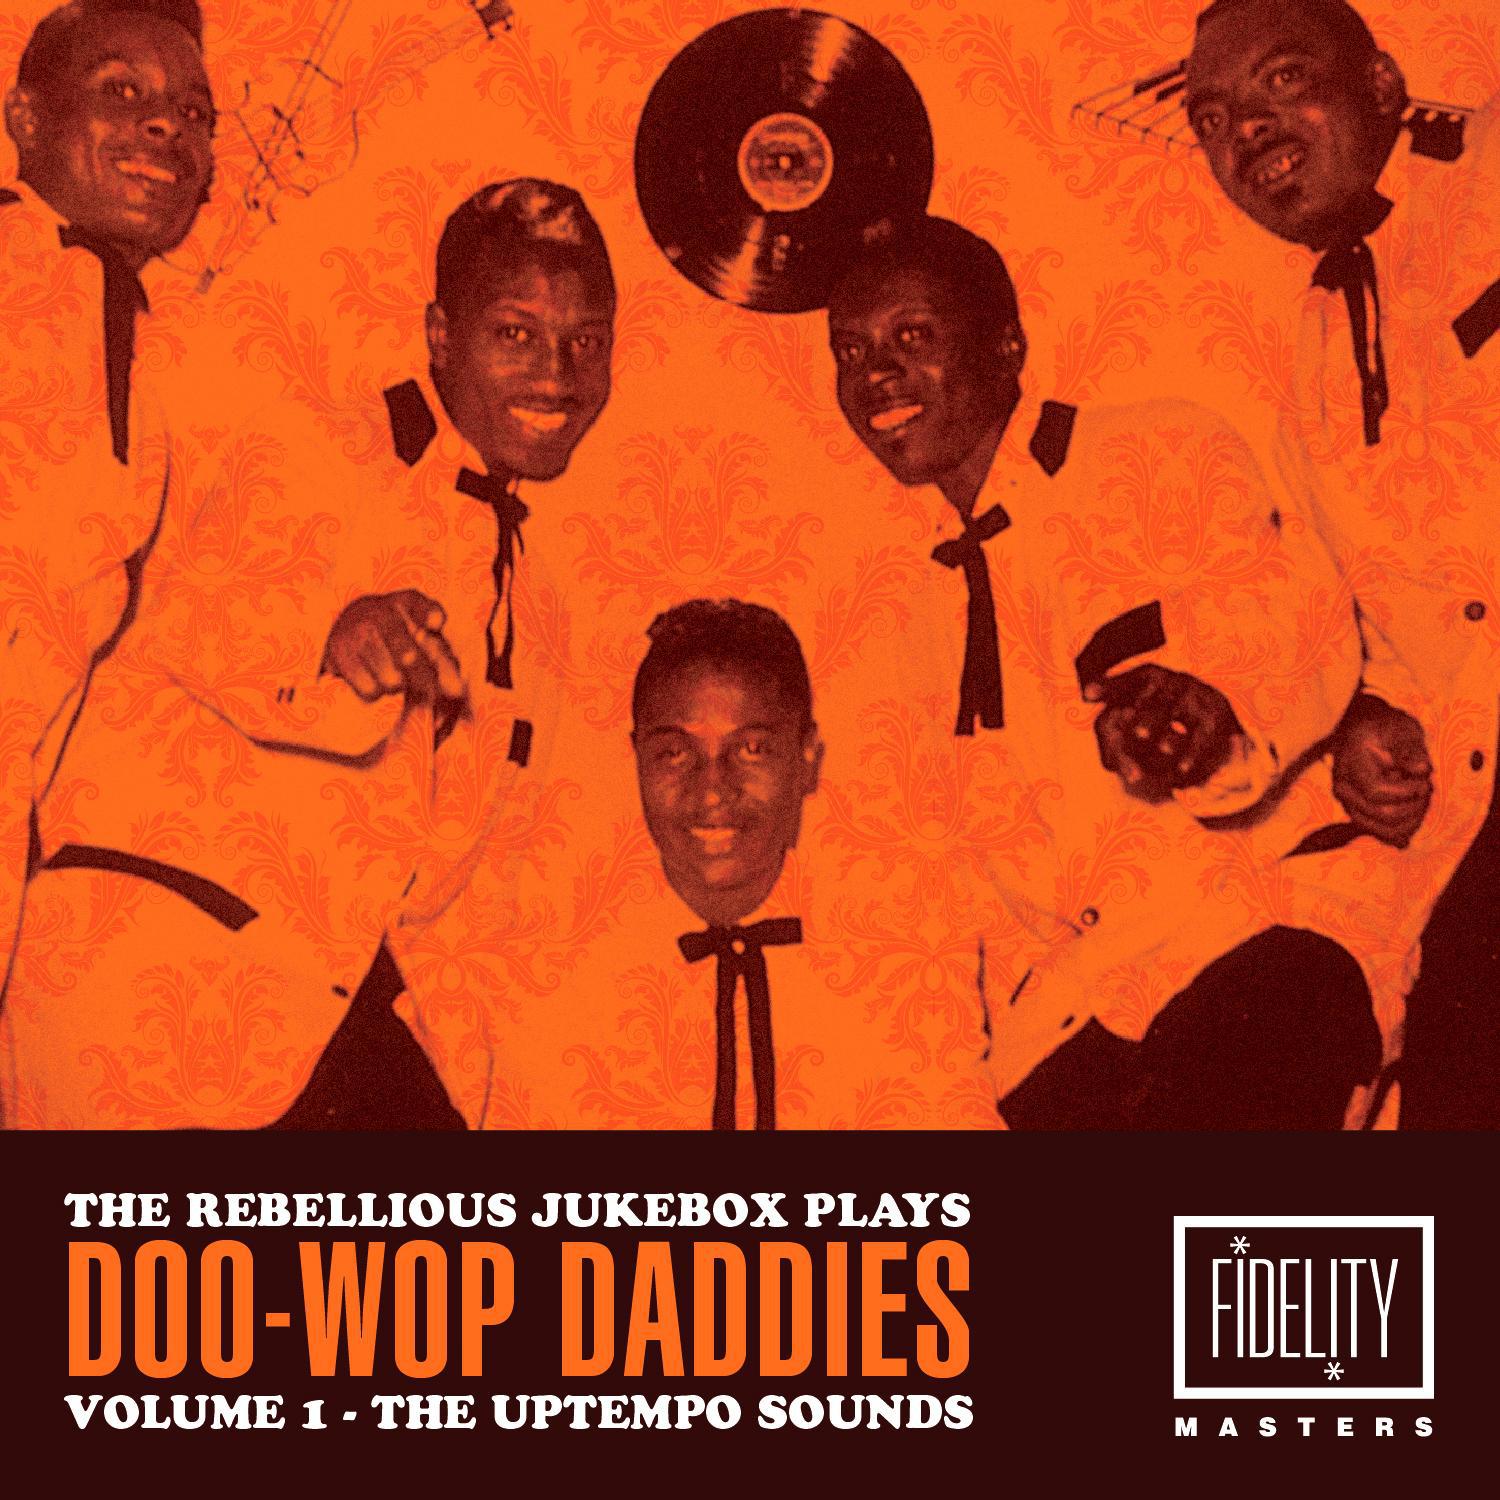 The Rebellious Juke Box Plays Doo-Wop Daddies (Volume 1 - The Uptempo Sounds)